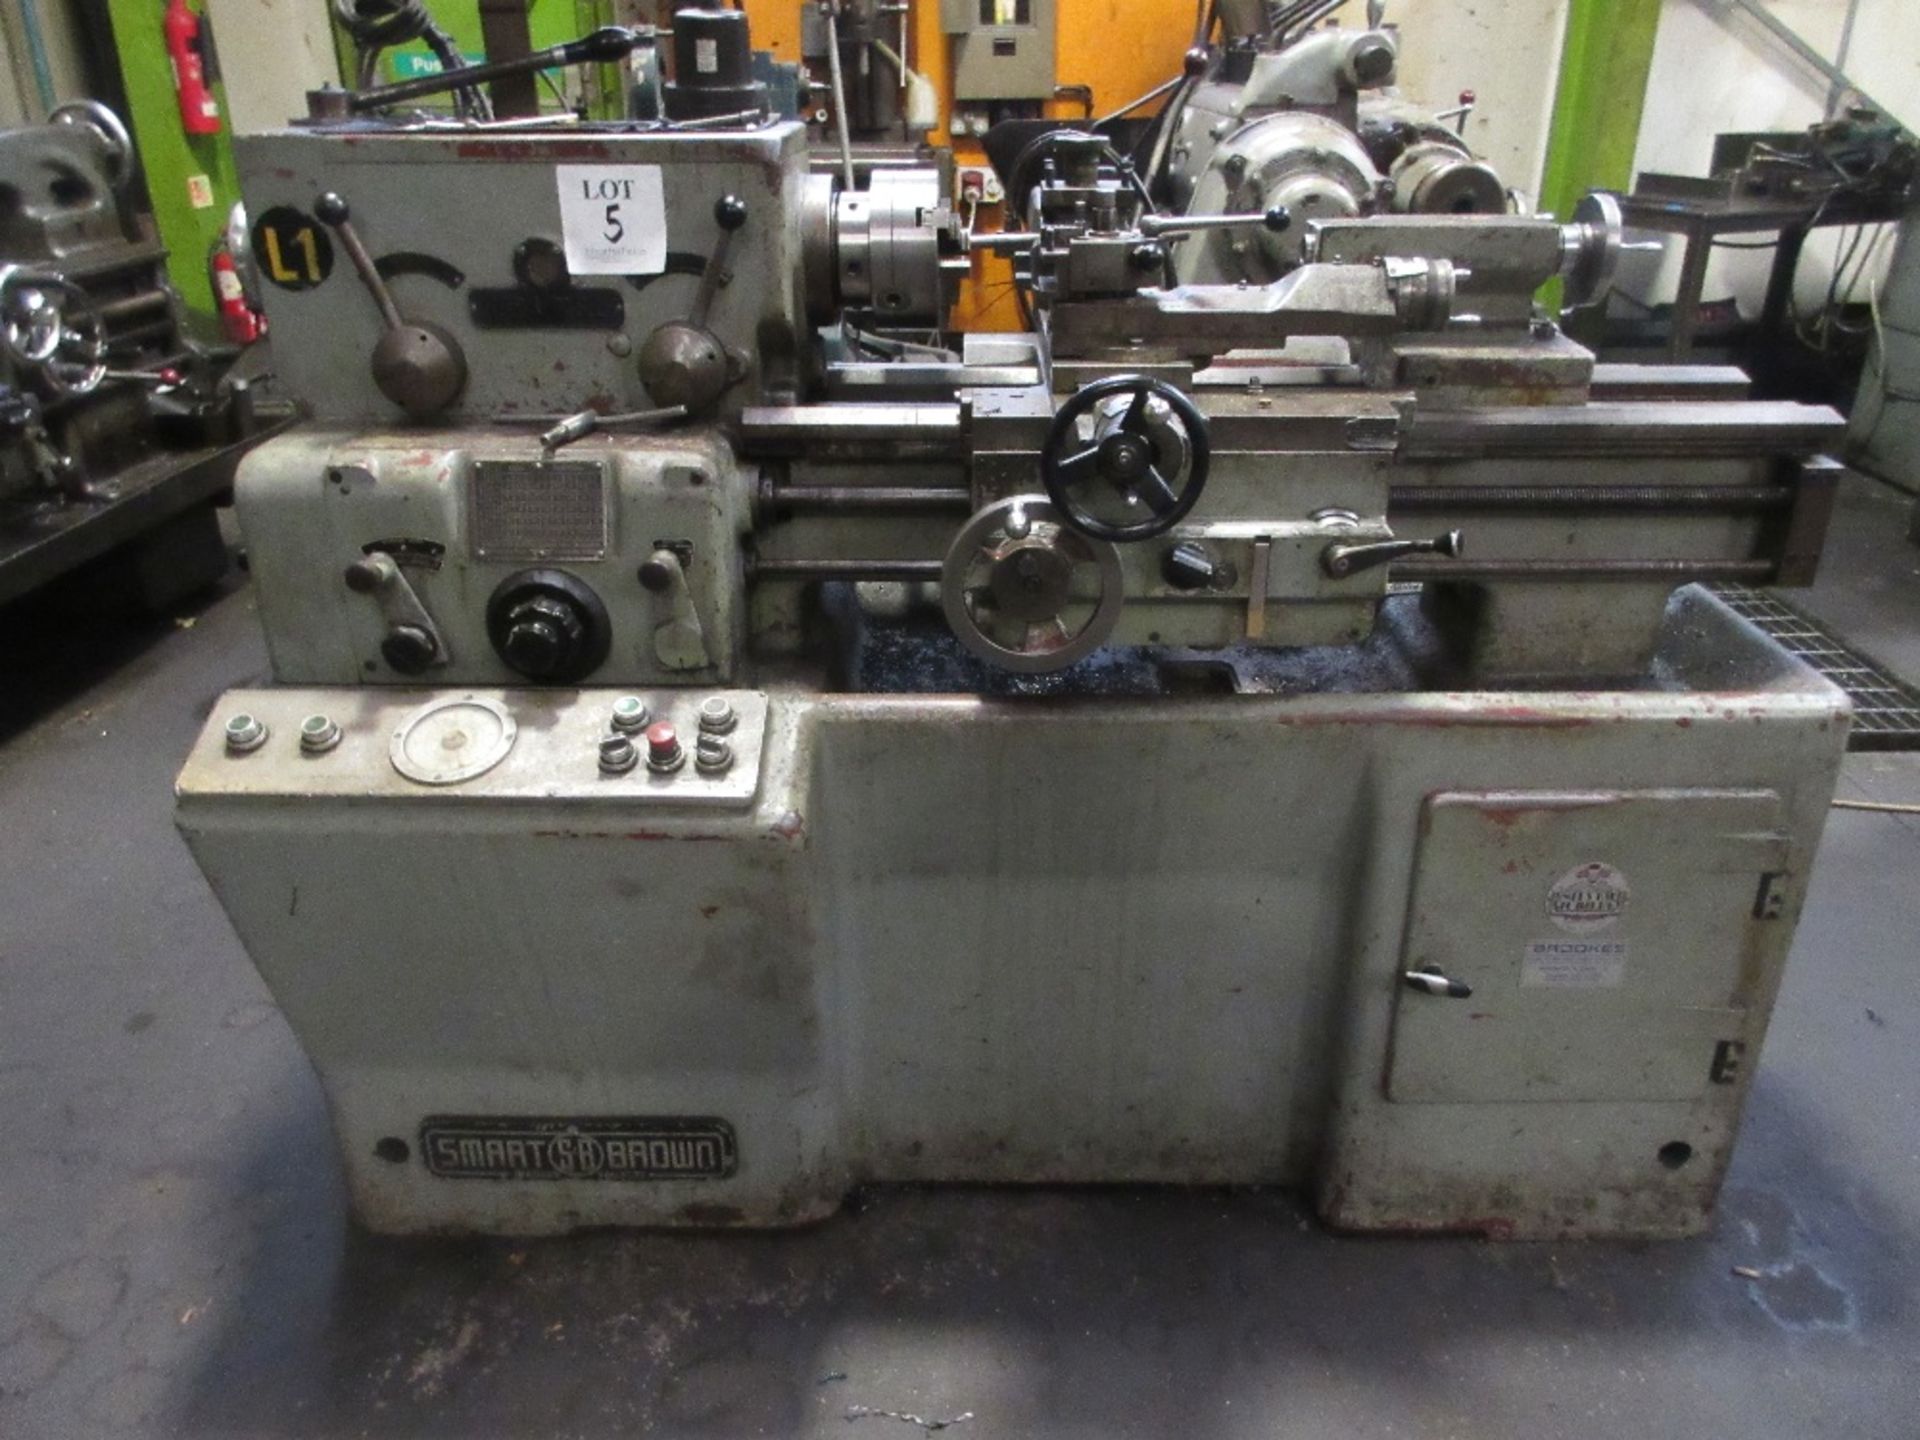 Smart and Brown 1024VSL centre lathe with Sony DRO 6" x 30". A Risk Assessment and Method